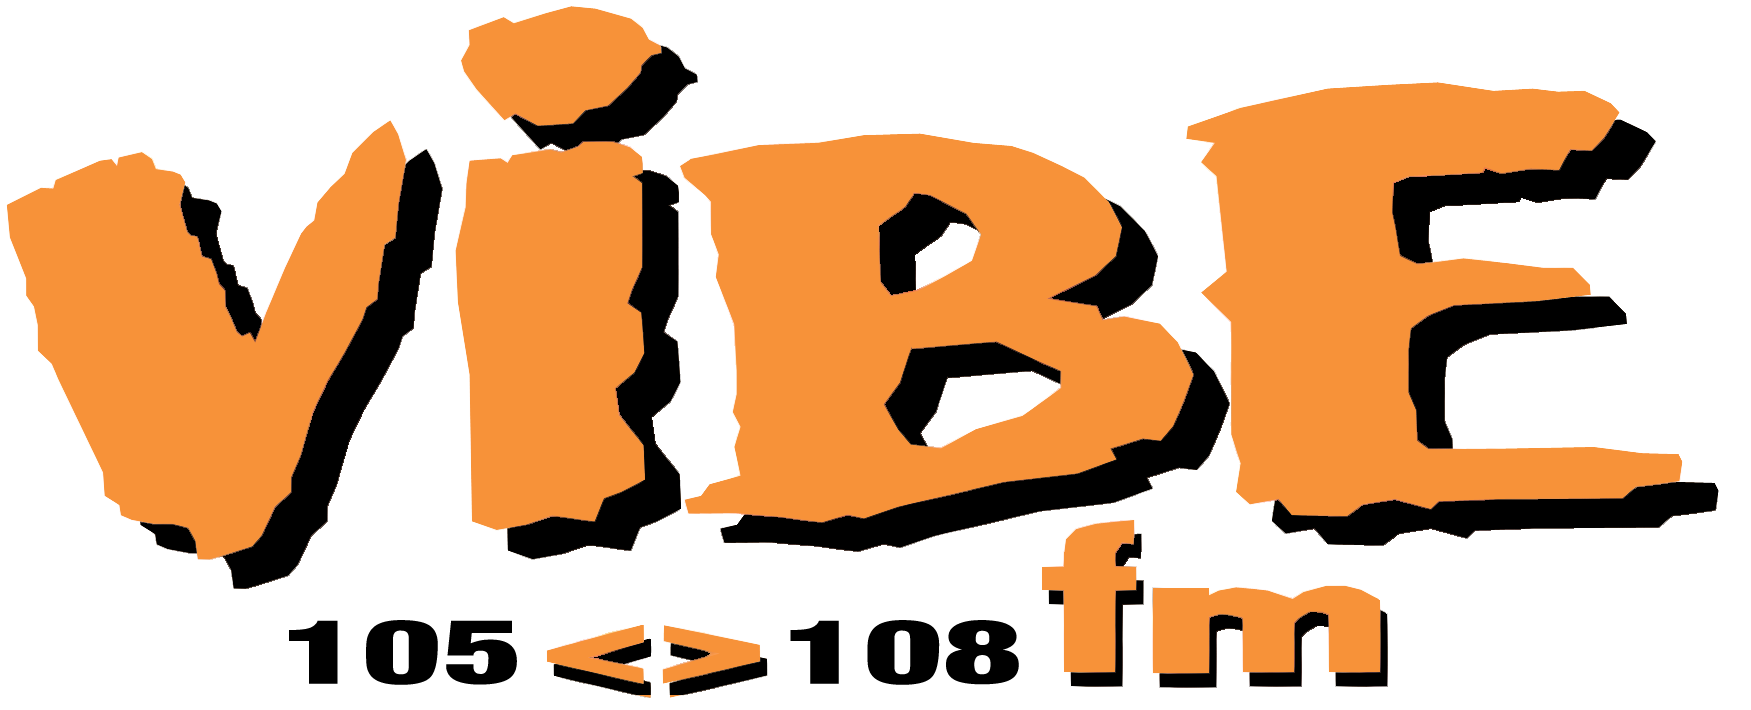 Stream episode 105<>108 Vibe FM - Launch (22nd November, 1997) by